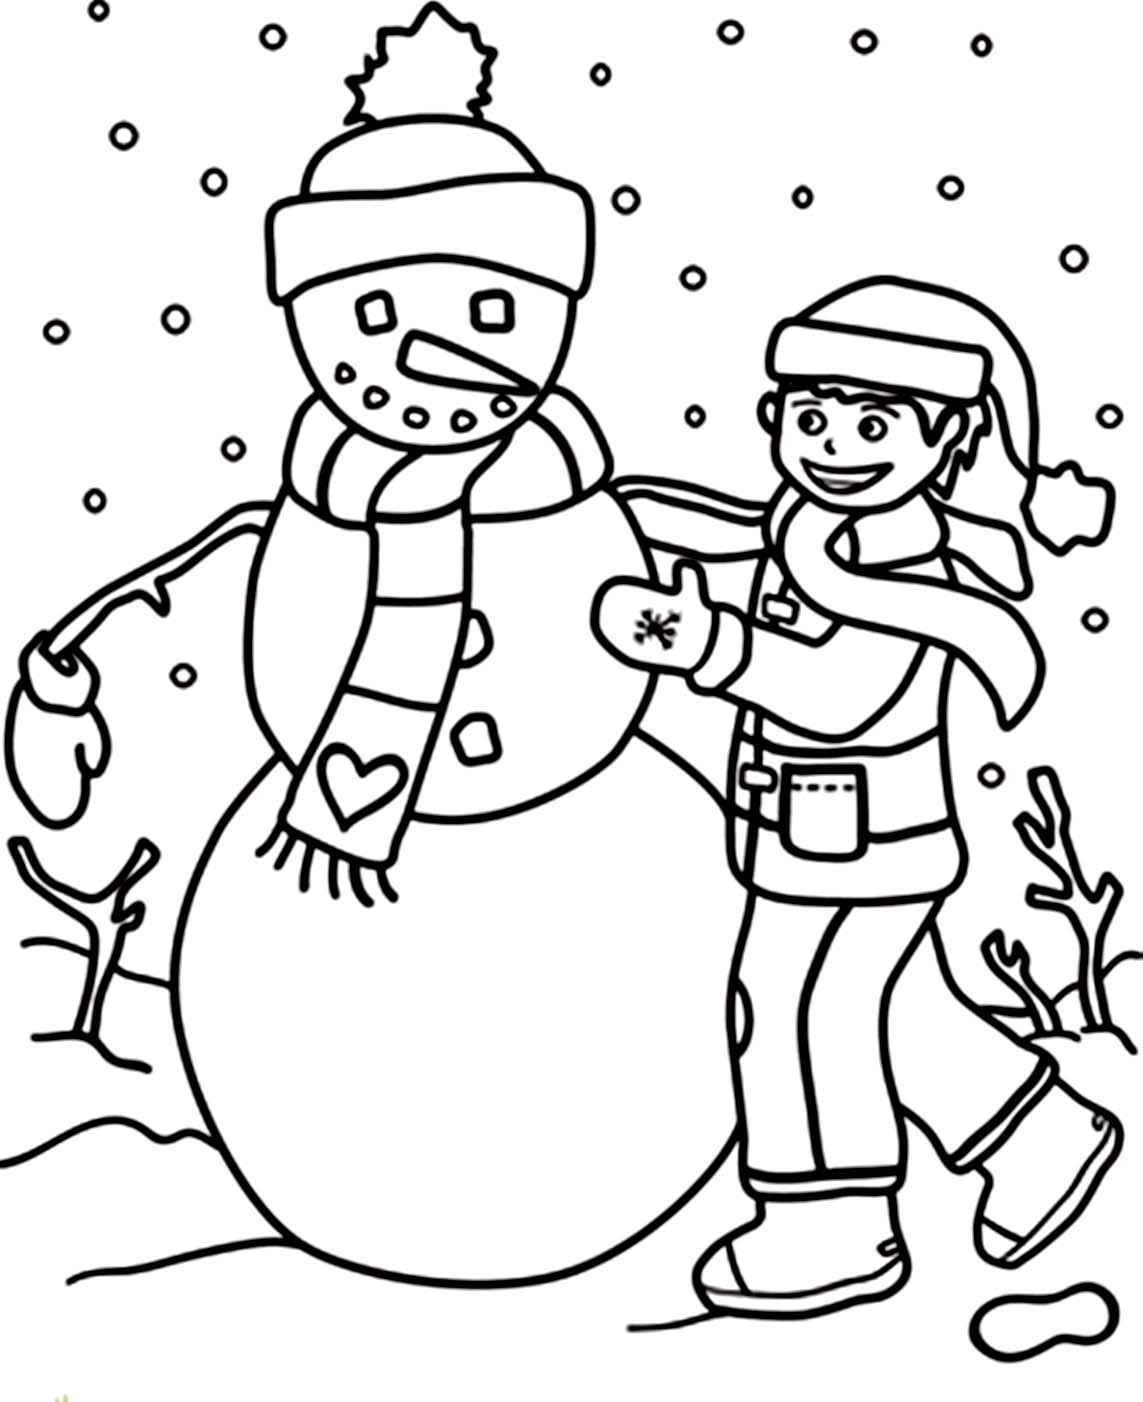 Snowman Coloring Pages For Adults
 Olaf The Snowman Coloring Pages Cute grig3